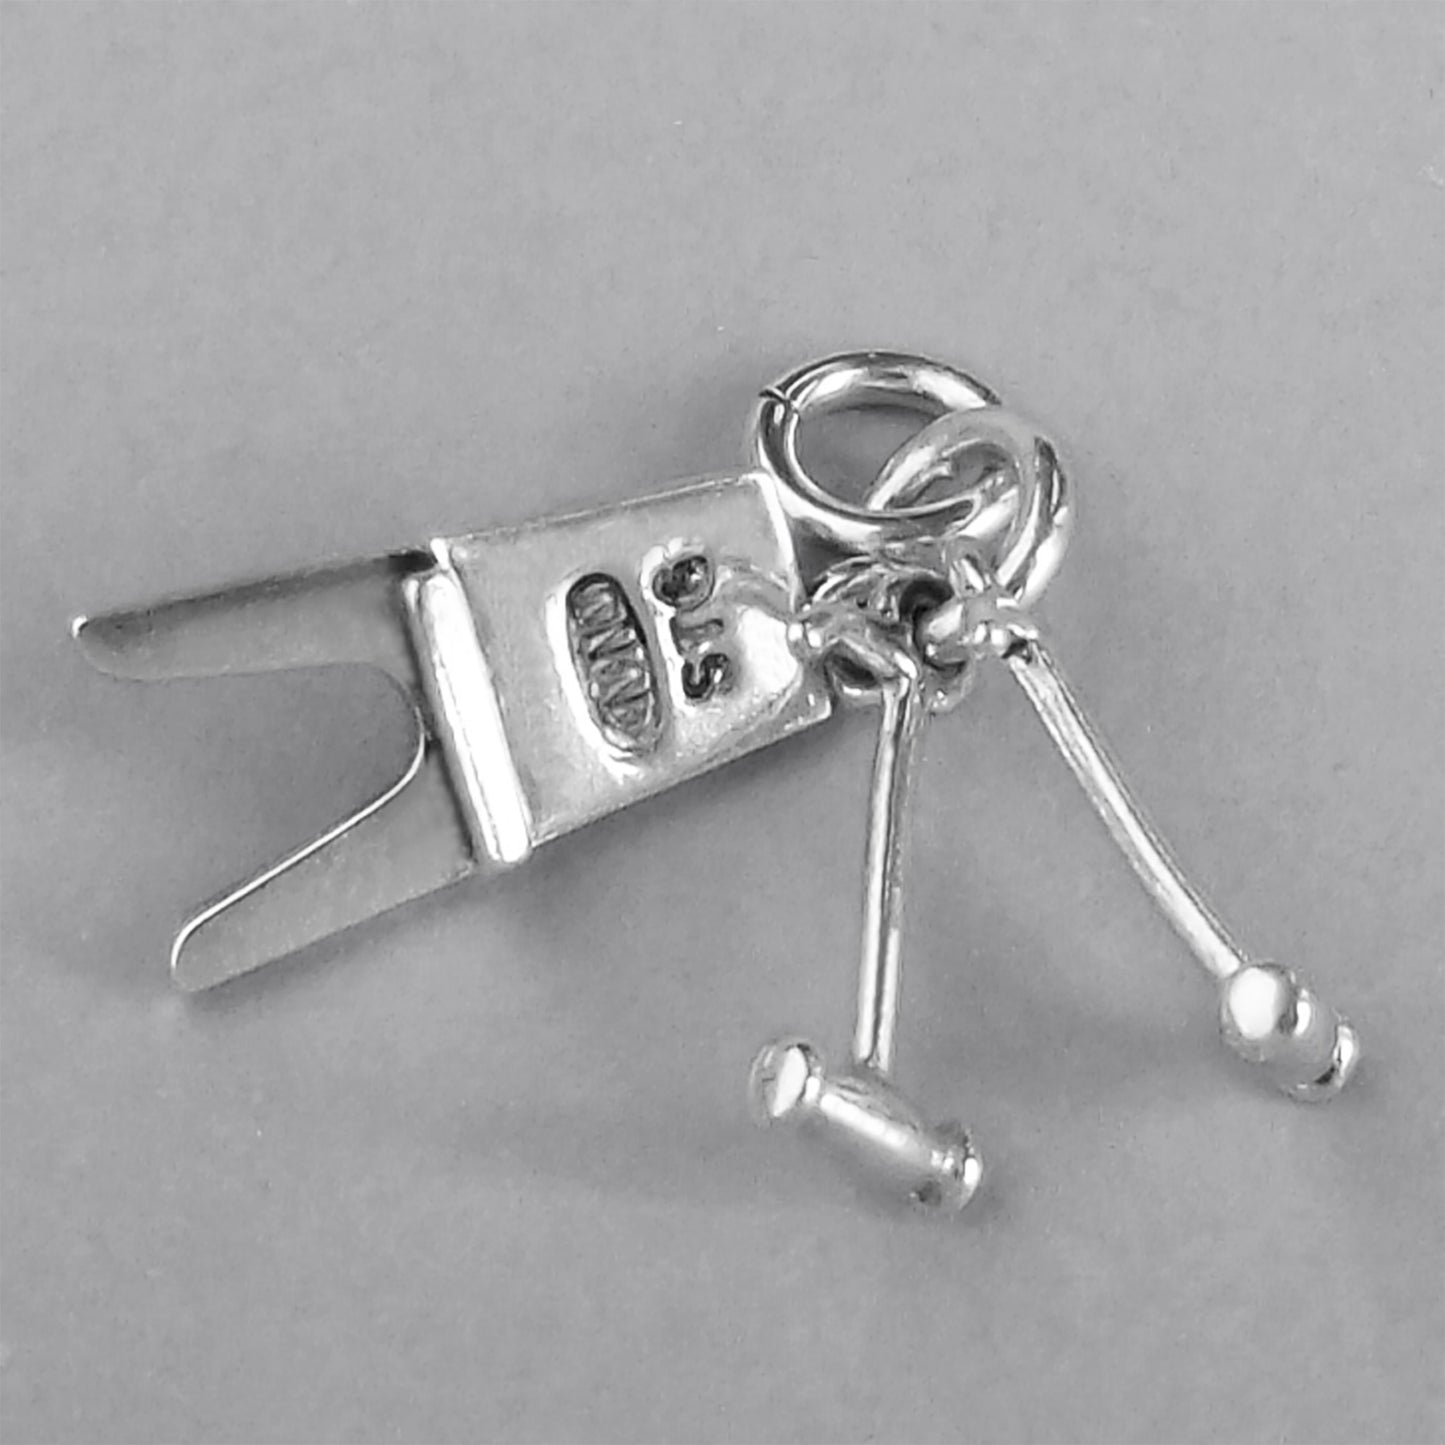 Boot Jack and Pulls Charm Sterling Silver or Gold